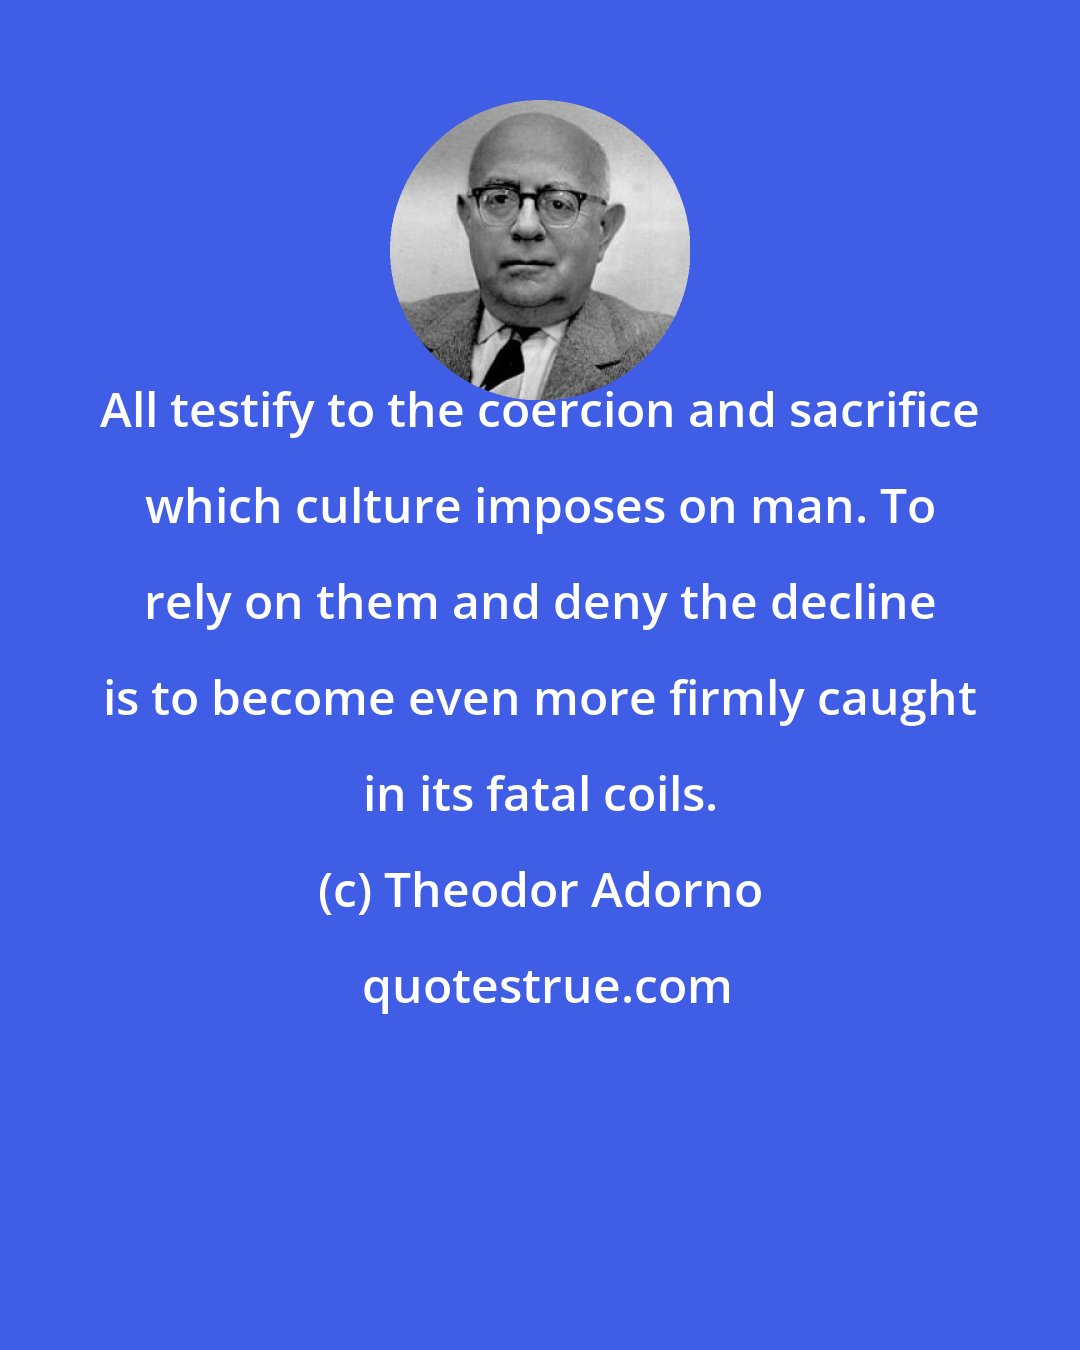 Theodor Adorno: All testify to the coercion and sacrifice which culture imposes on man. To rely on them and deny the decline is to become even more firmly caught in its fatal coils.